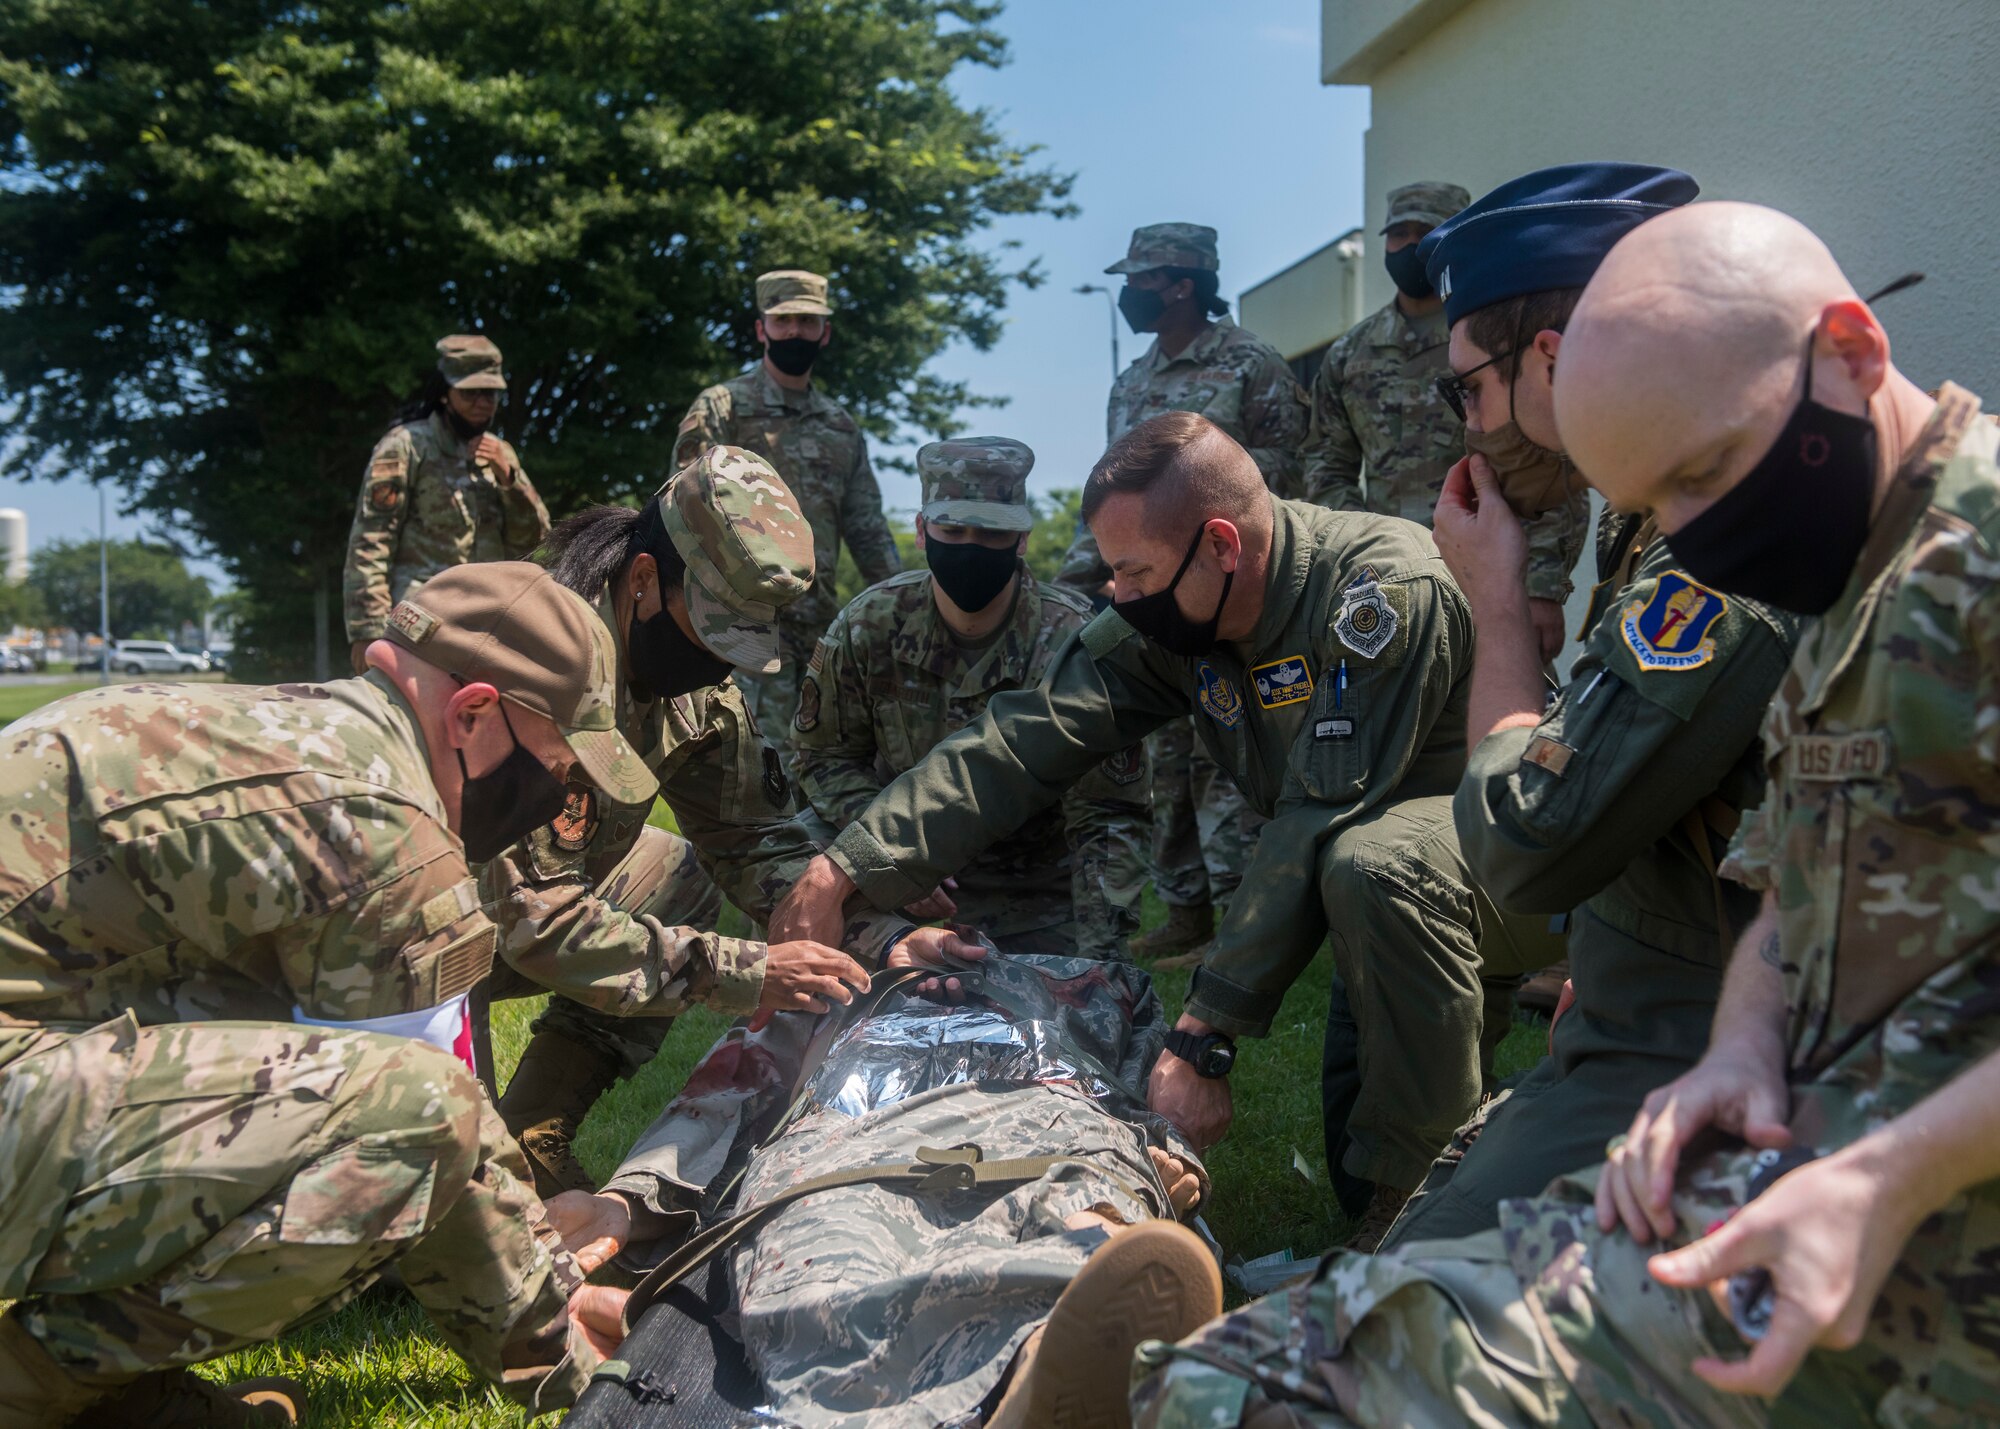 Group of servicemembers in uniform apply medical aid to simulated patient.